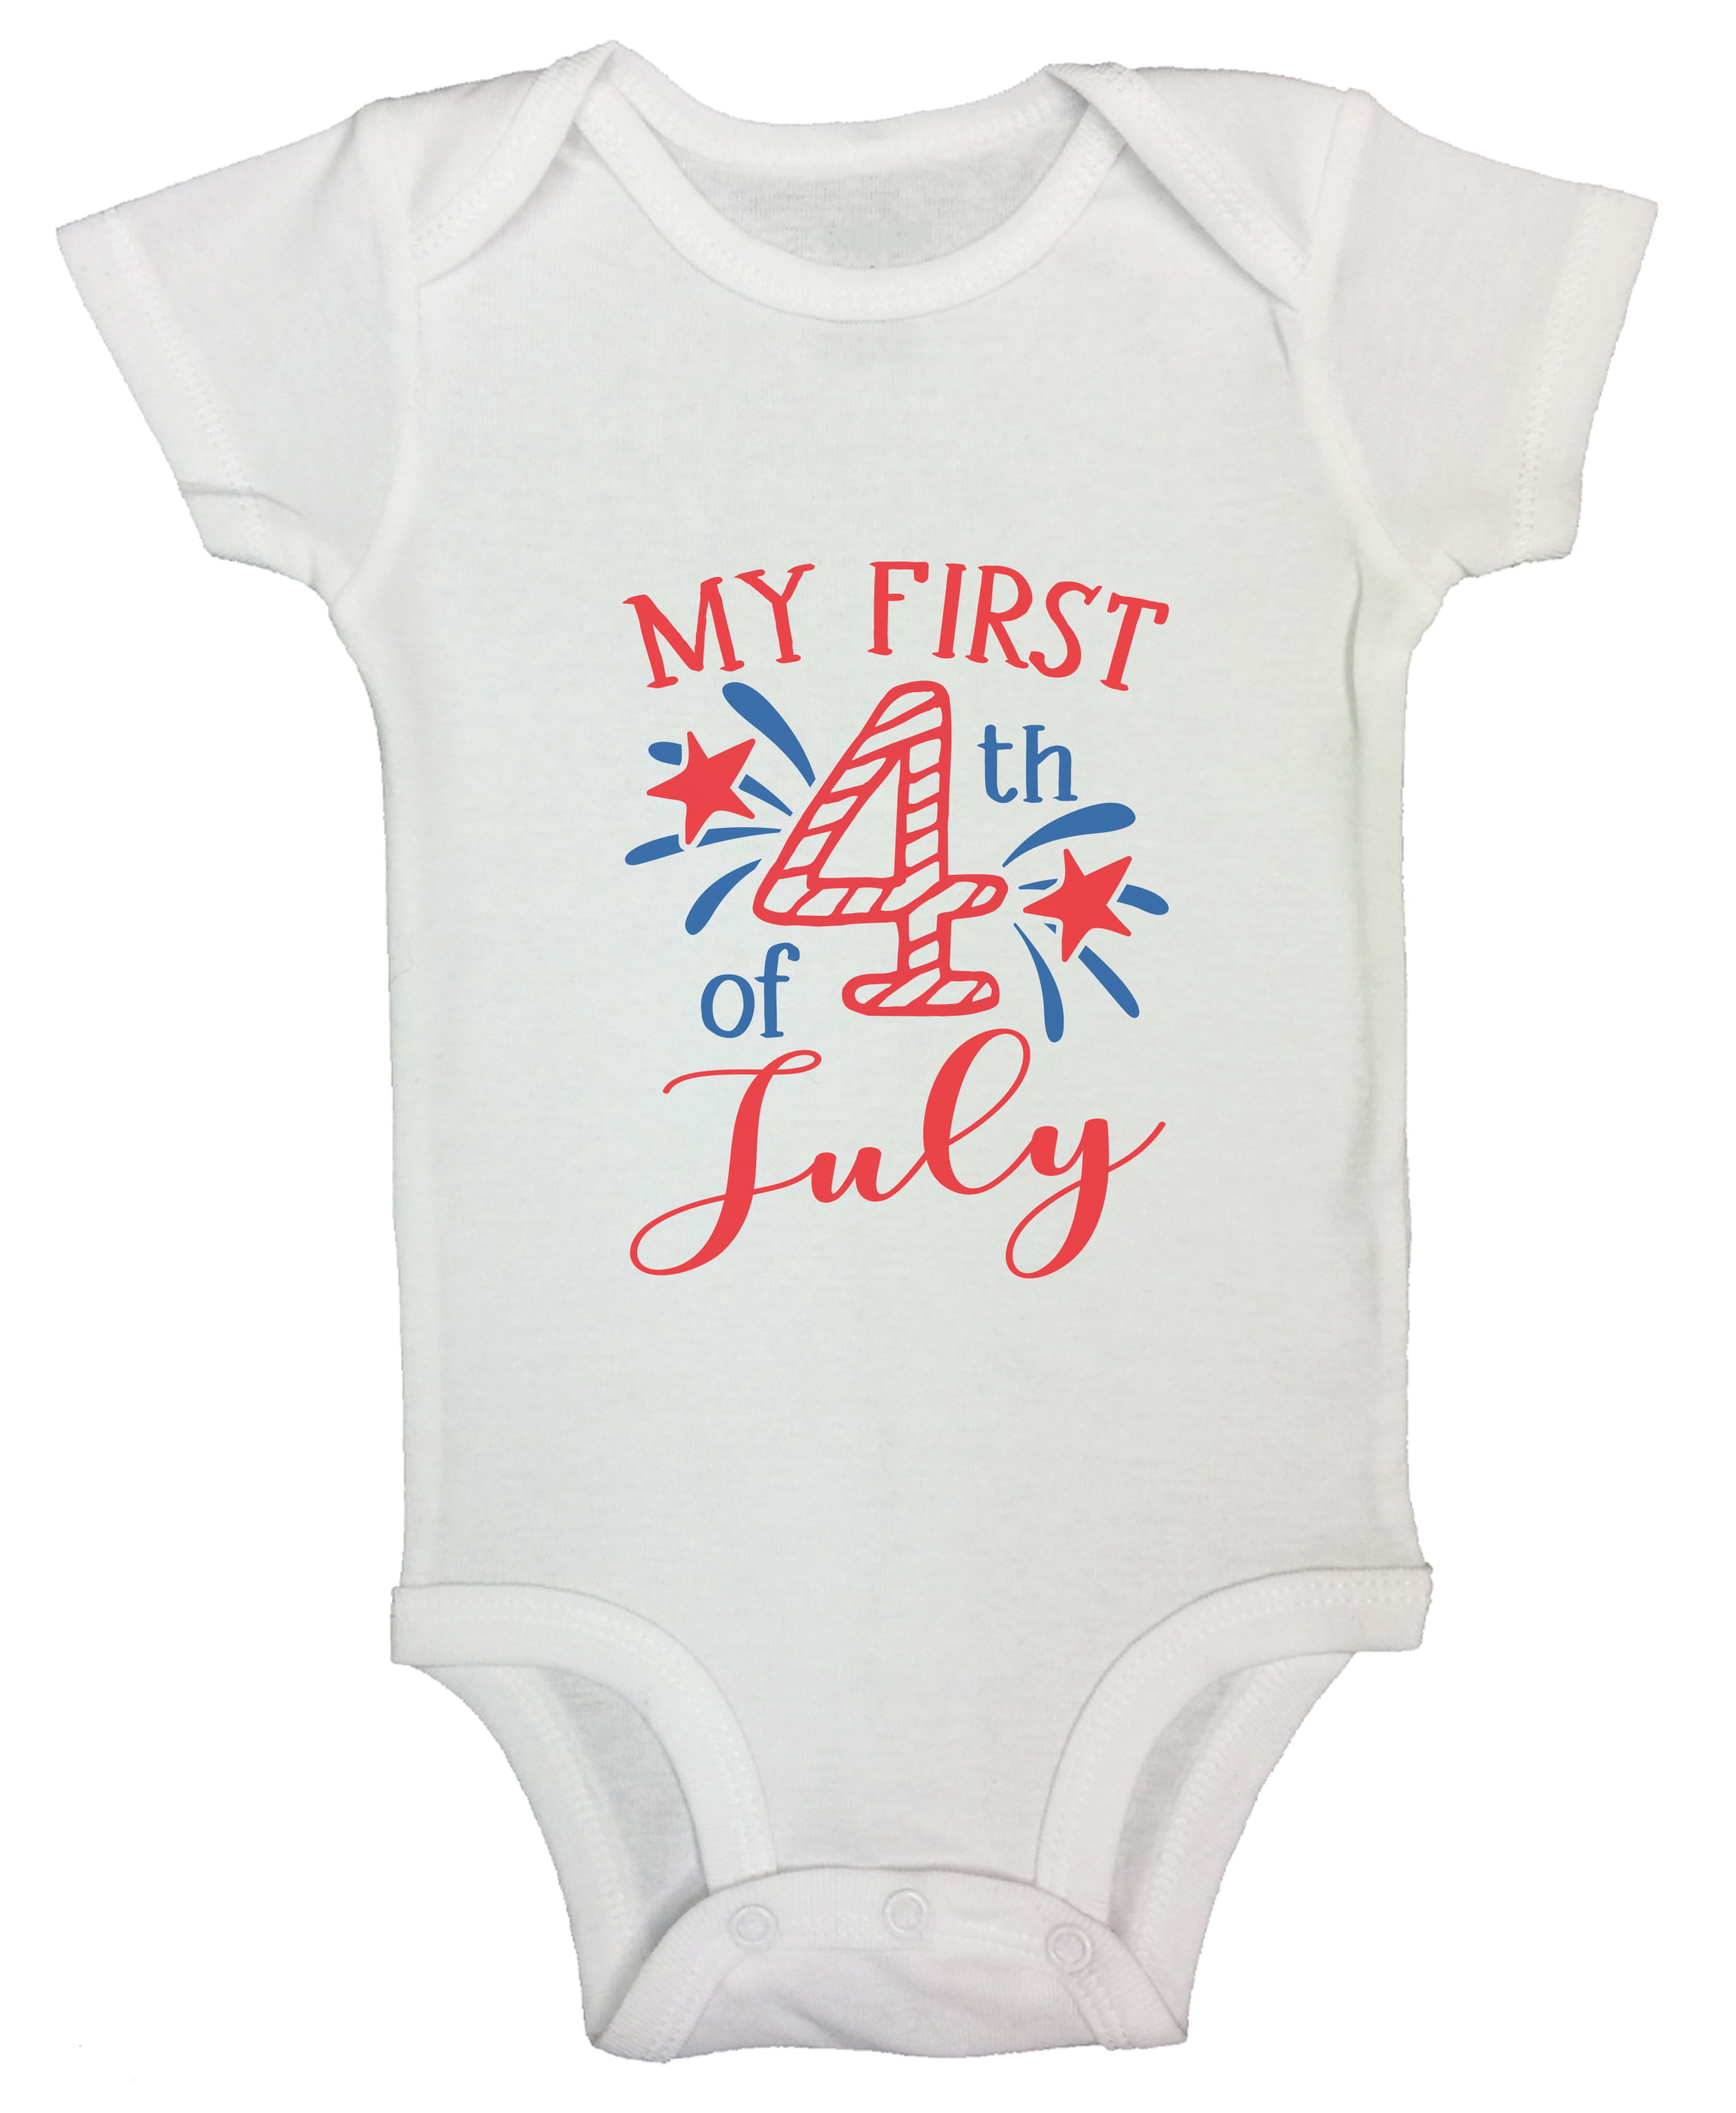 Infant Unisex Carters Brand White with Red trim My First 4th July Size 3M 6M 18M 